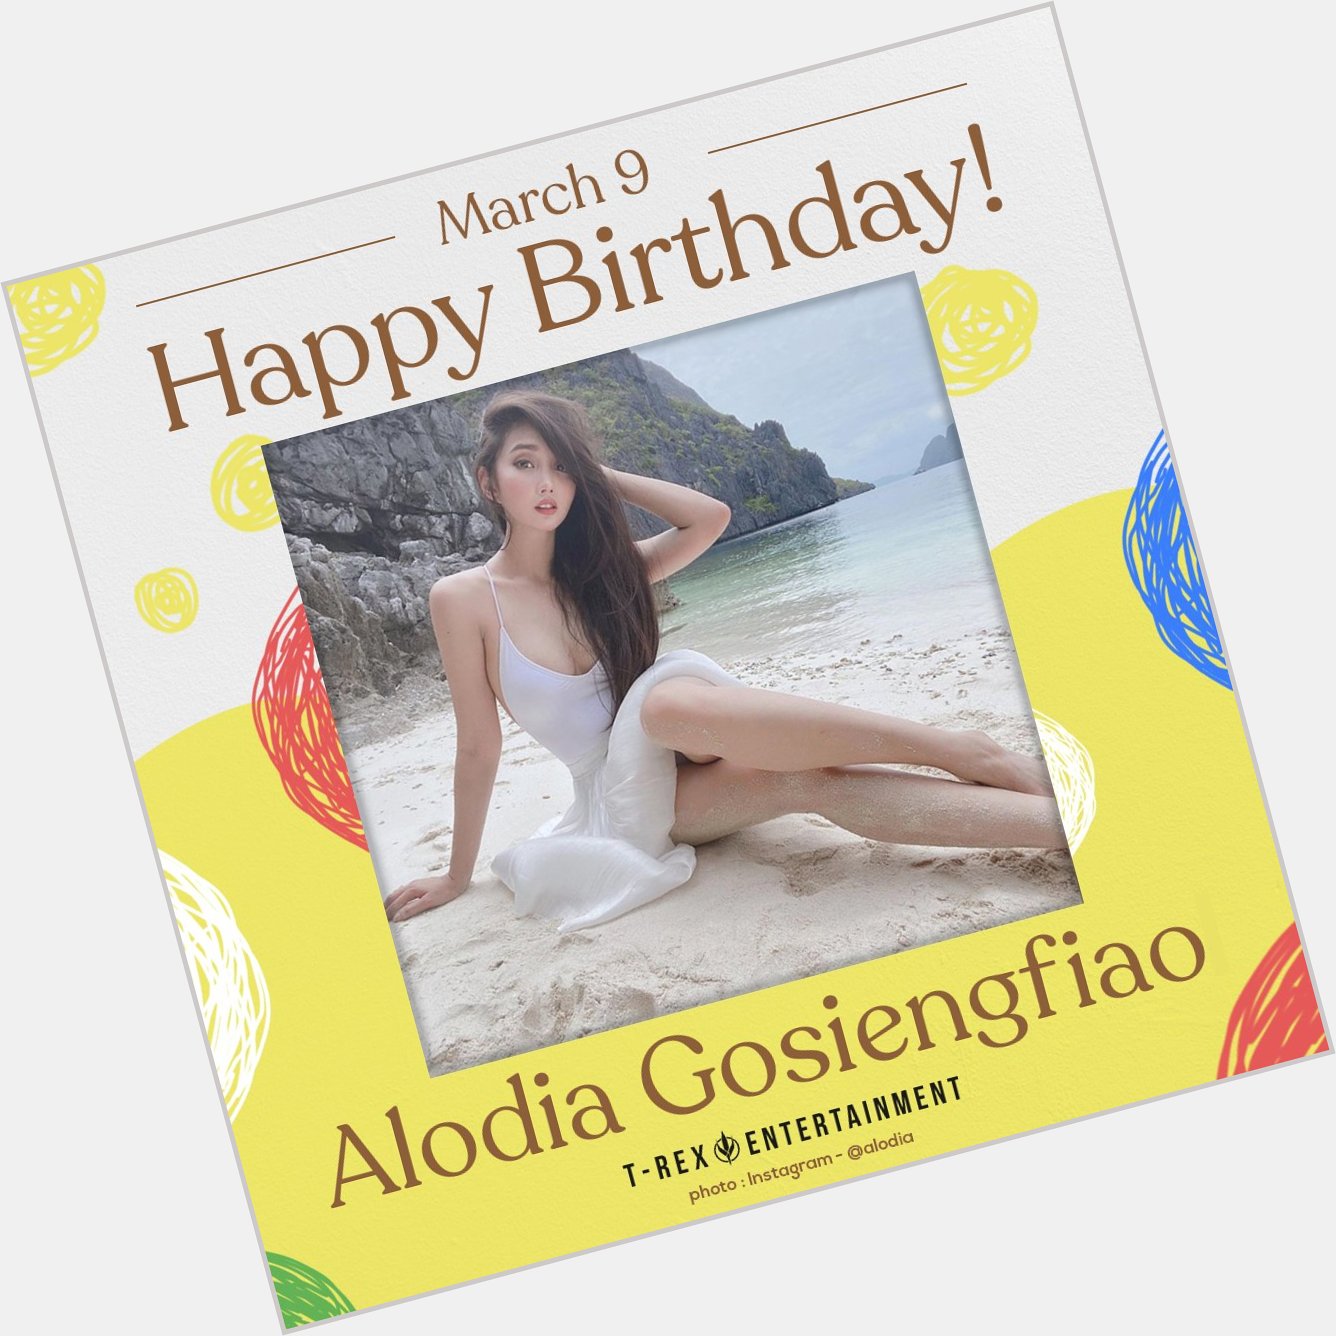 Happy 32nd birthday, Alodia Gosiengfiao! May you have a blessed day. 